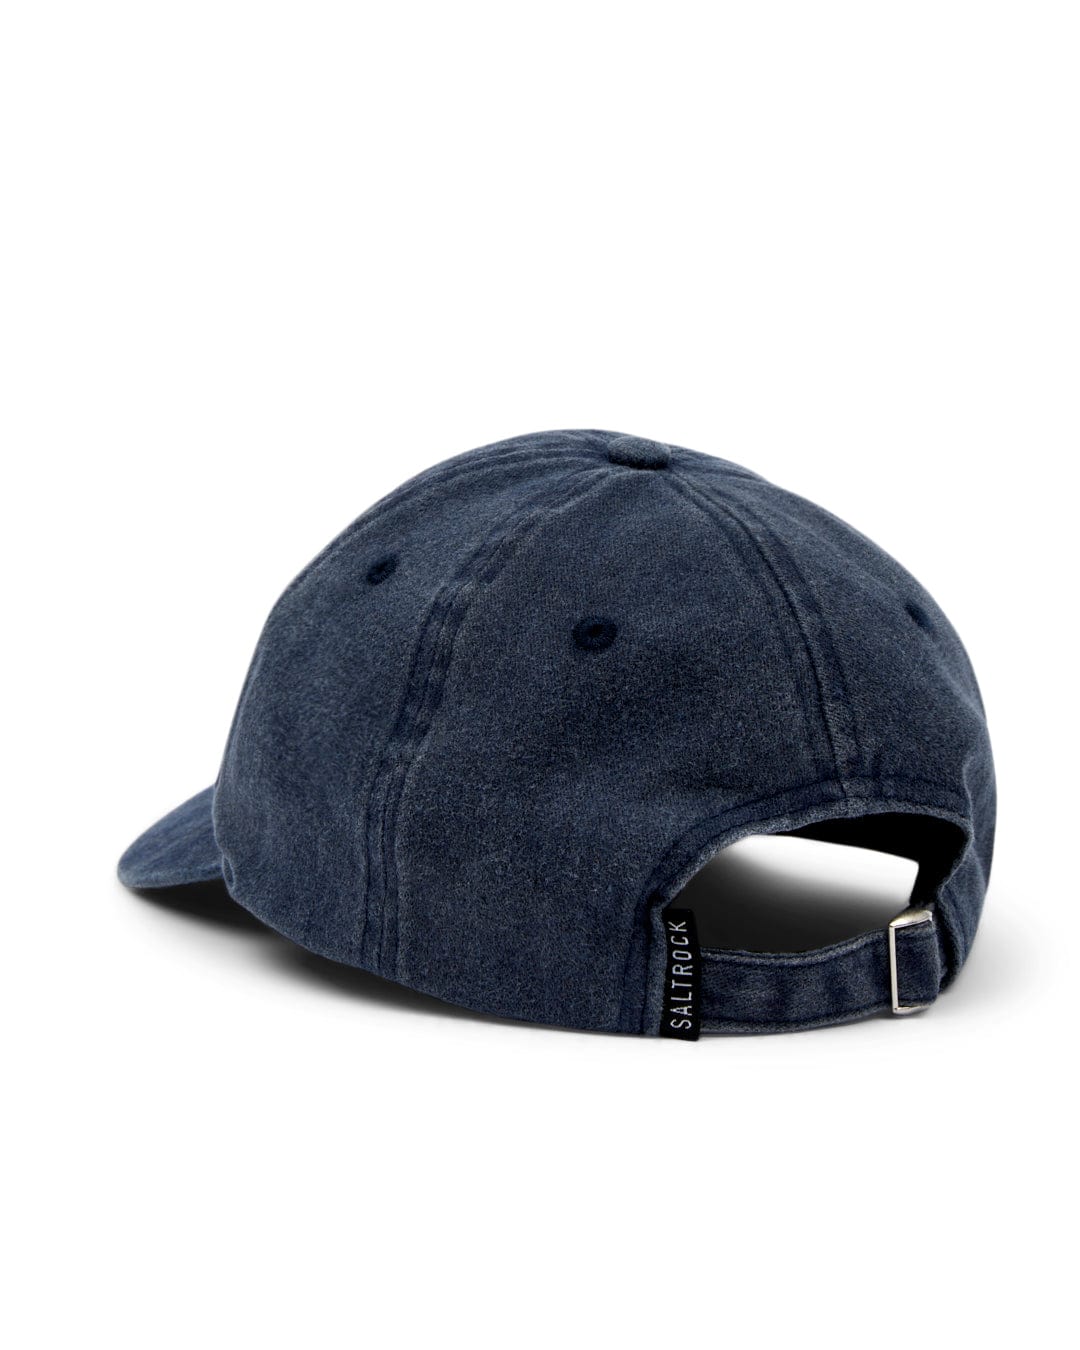 A Sunburst Cap - Dark Blue with Saltrock branding and an adjustable strap displayed against a white background.